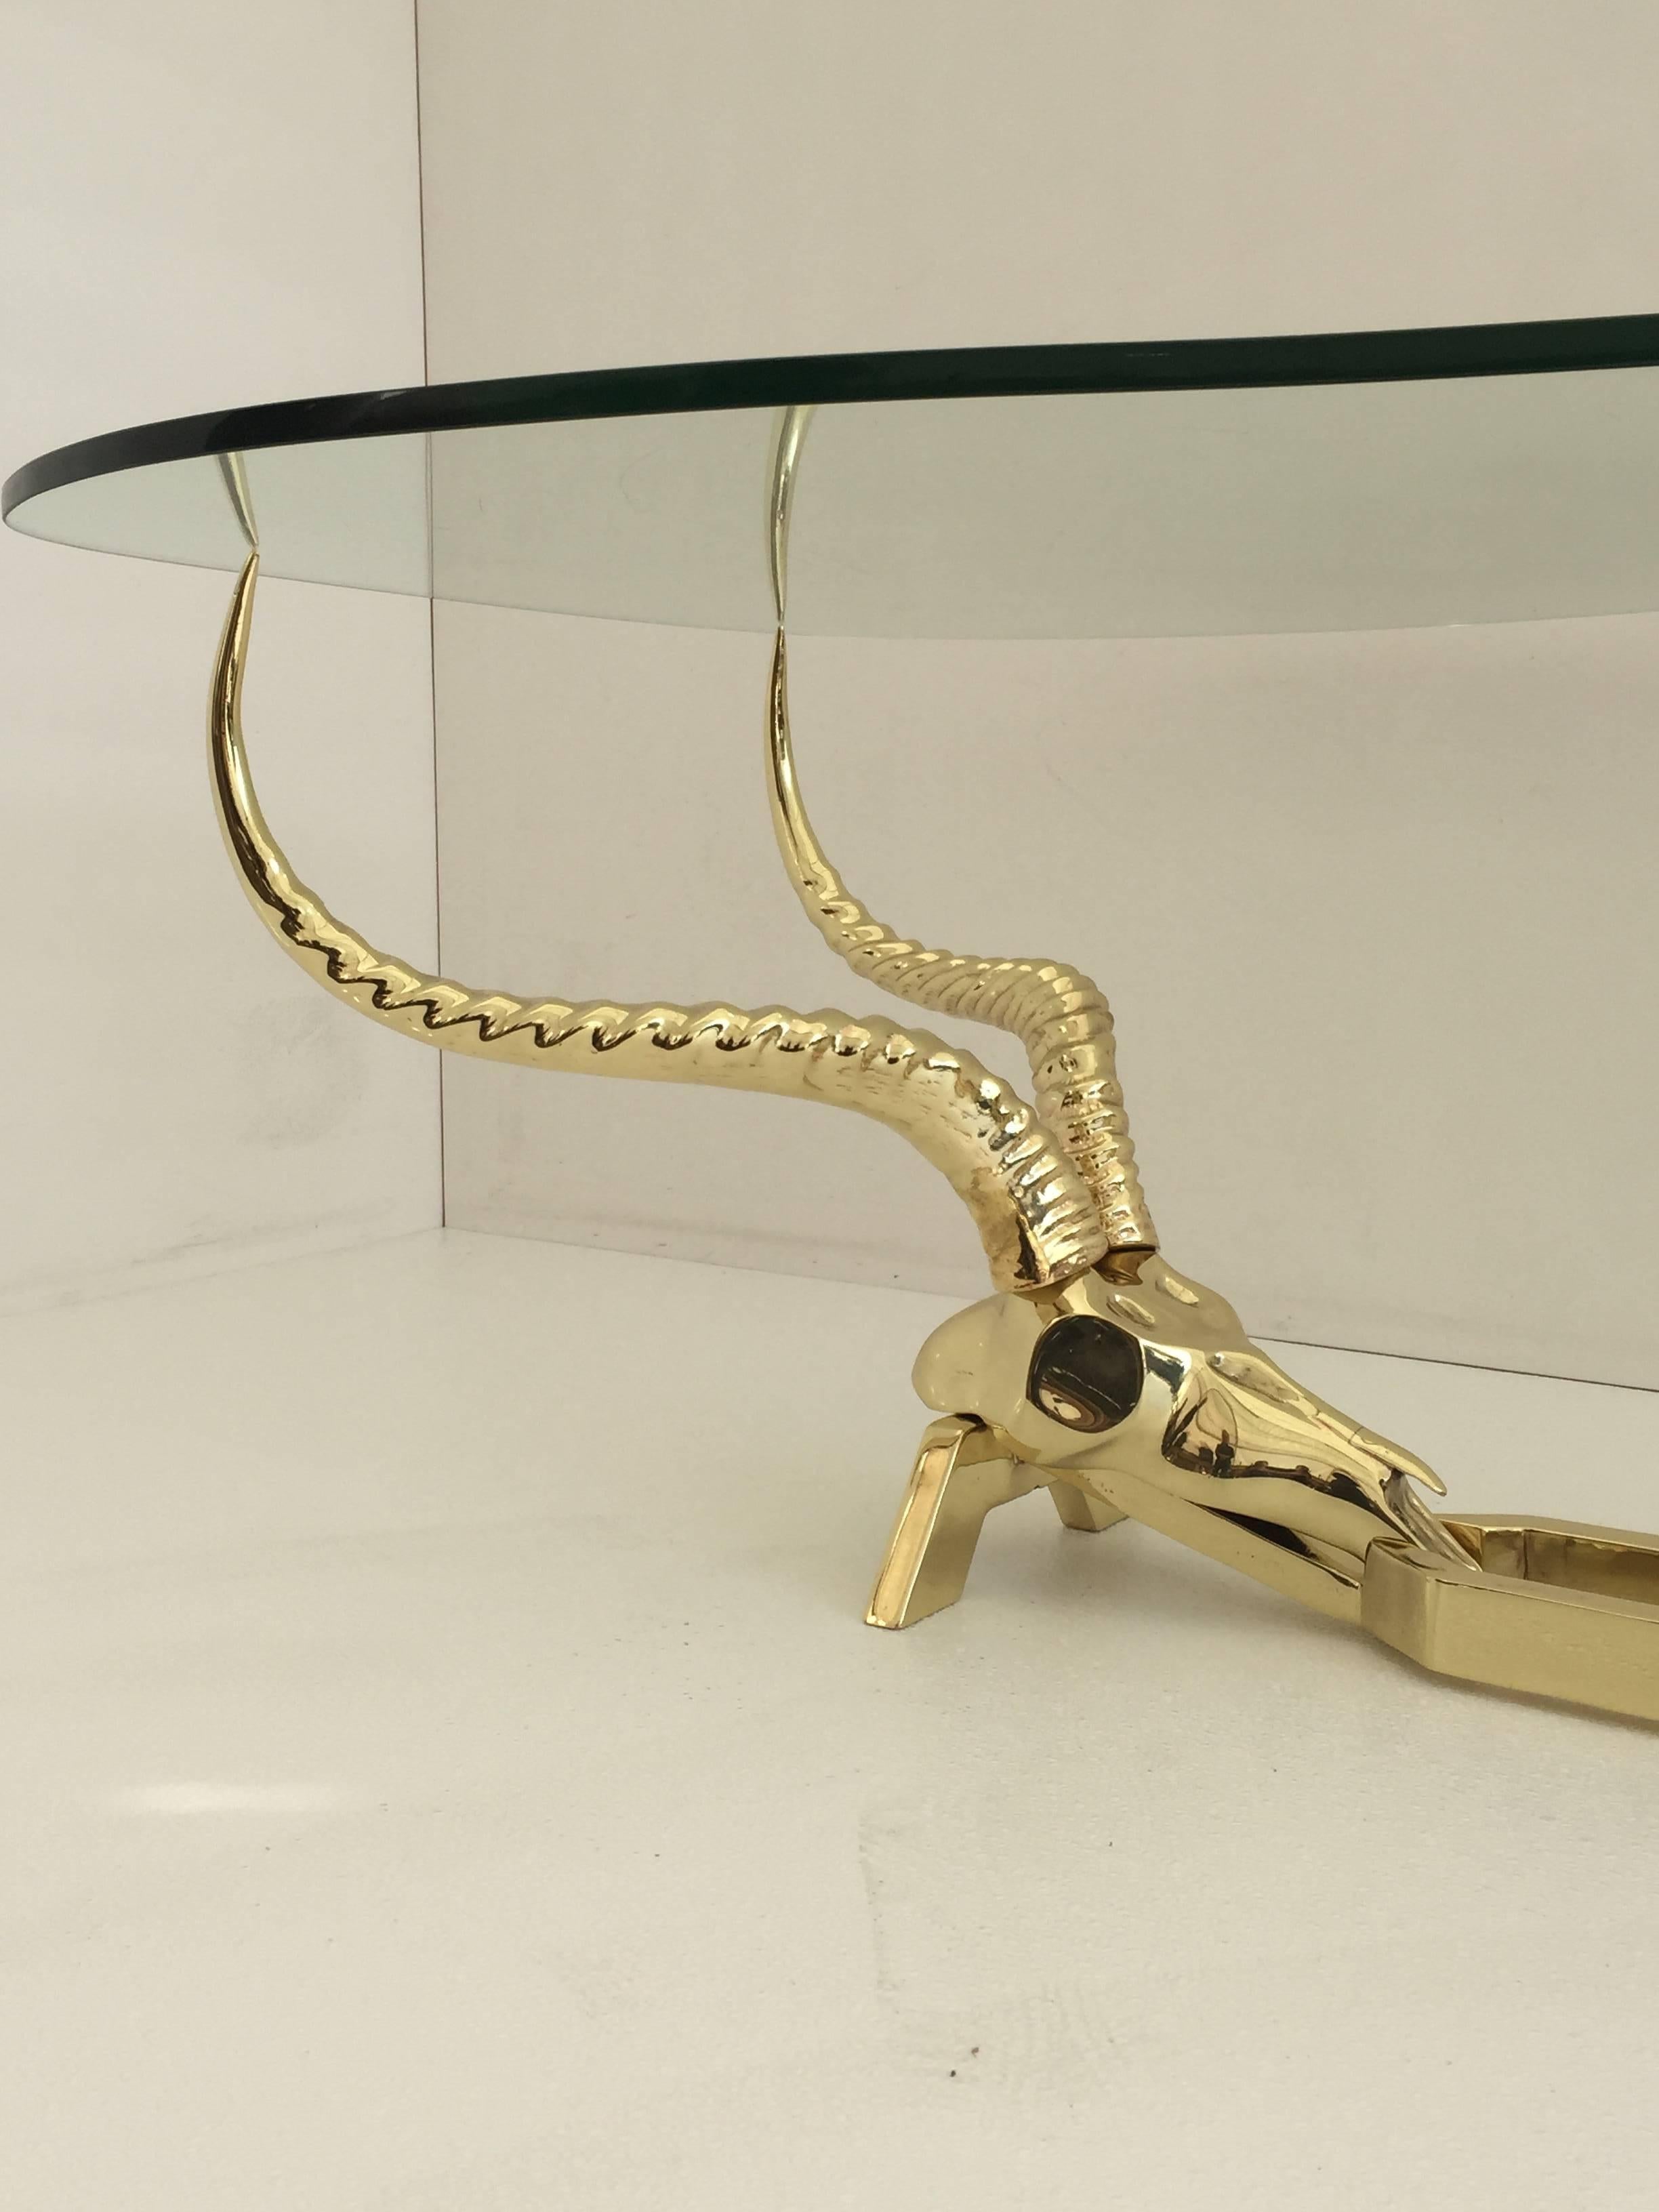 Brass ibex or antelope coffee table by Fondica, France.
Base is 15" by 41" by 16.5" high.
It's made of brass-plated steel.